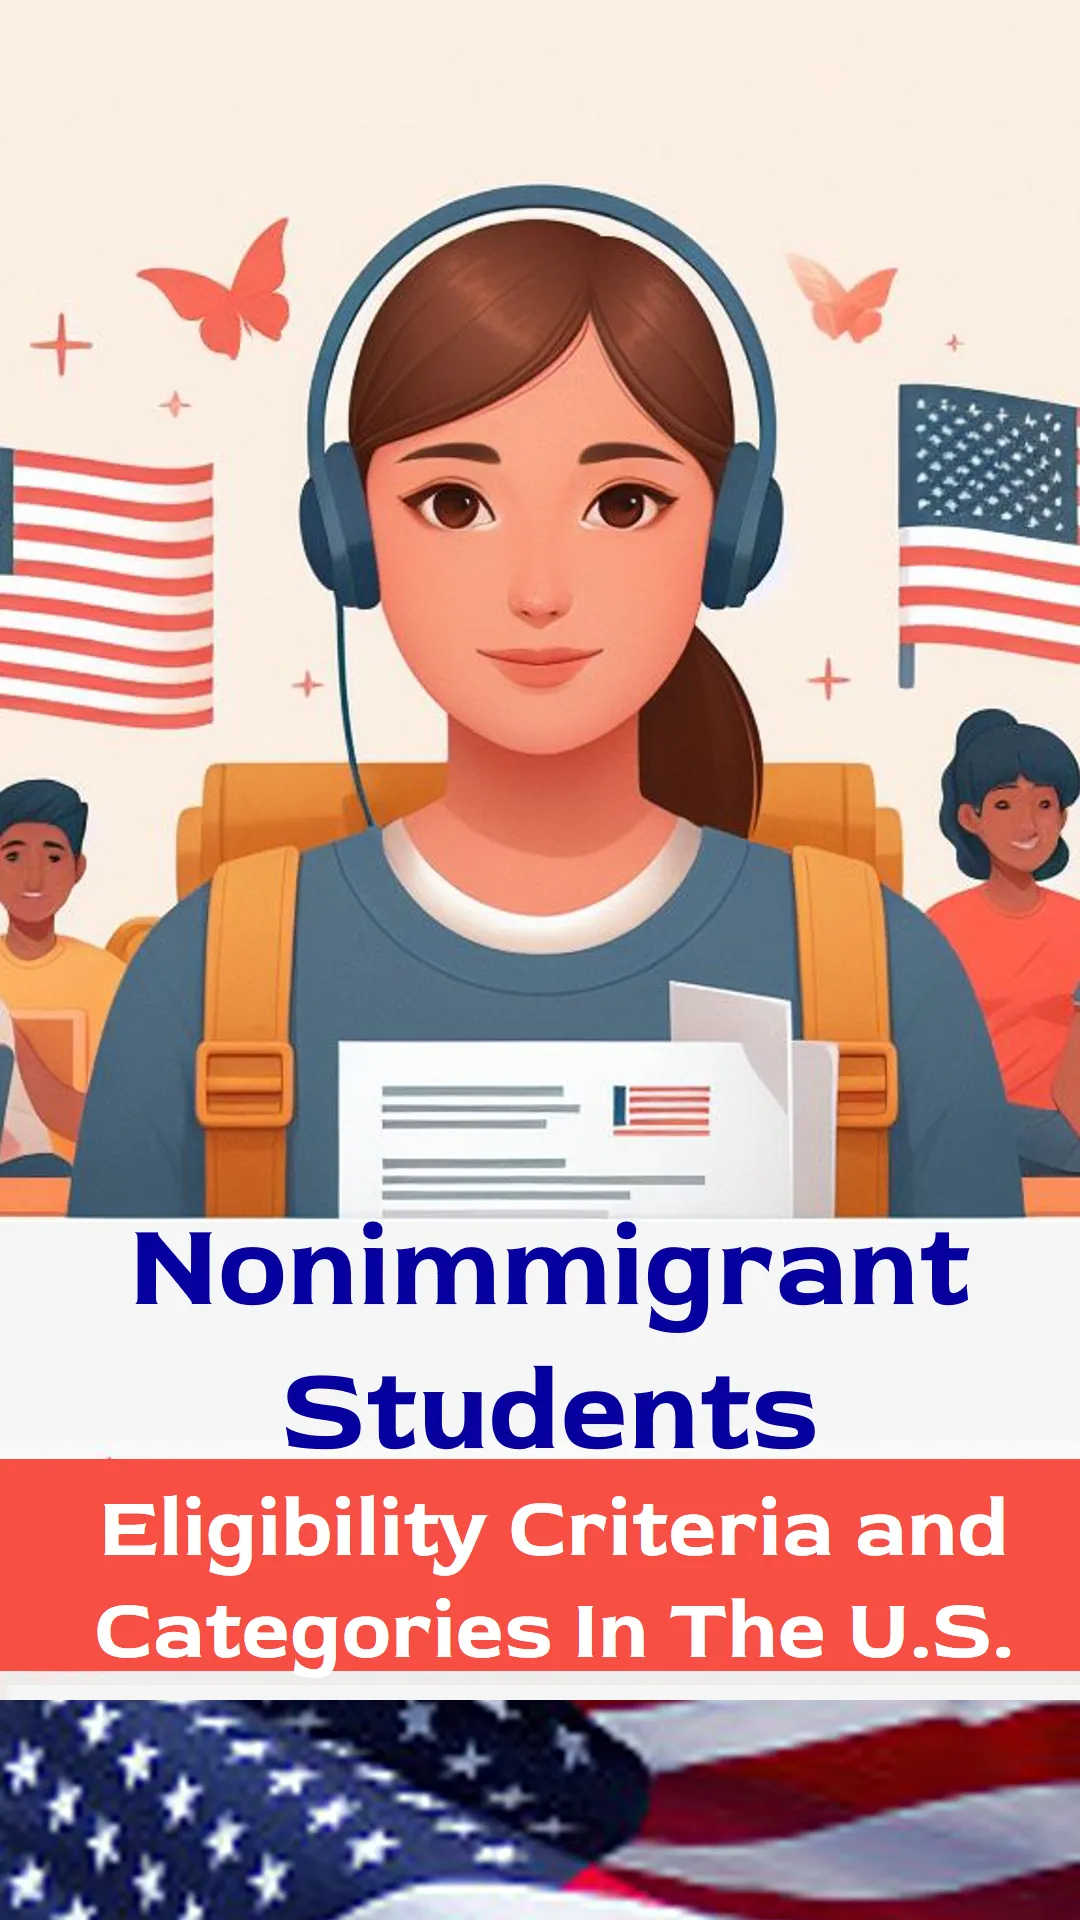 Nonimmigrant Students Eligibility Criteria and Categories In The U.S.